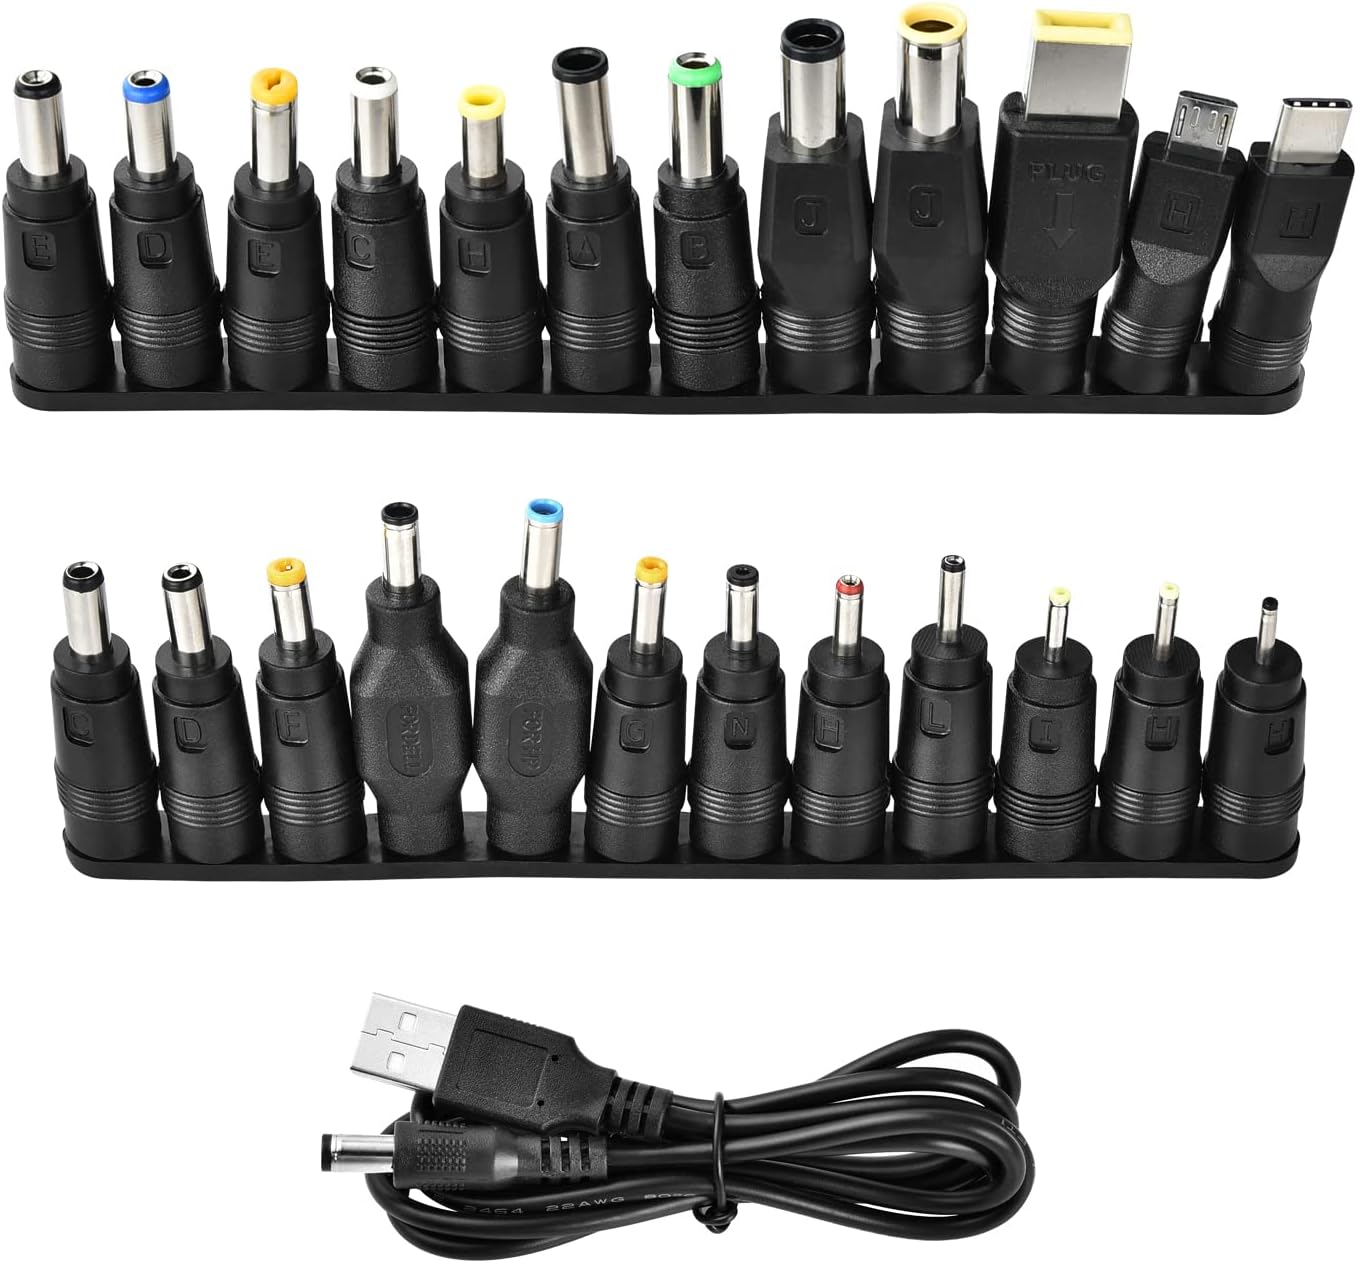 aceyoon USB 5V DC Power Supply with 24pcs DC Barrel [...]